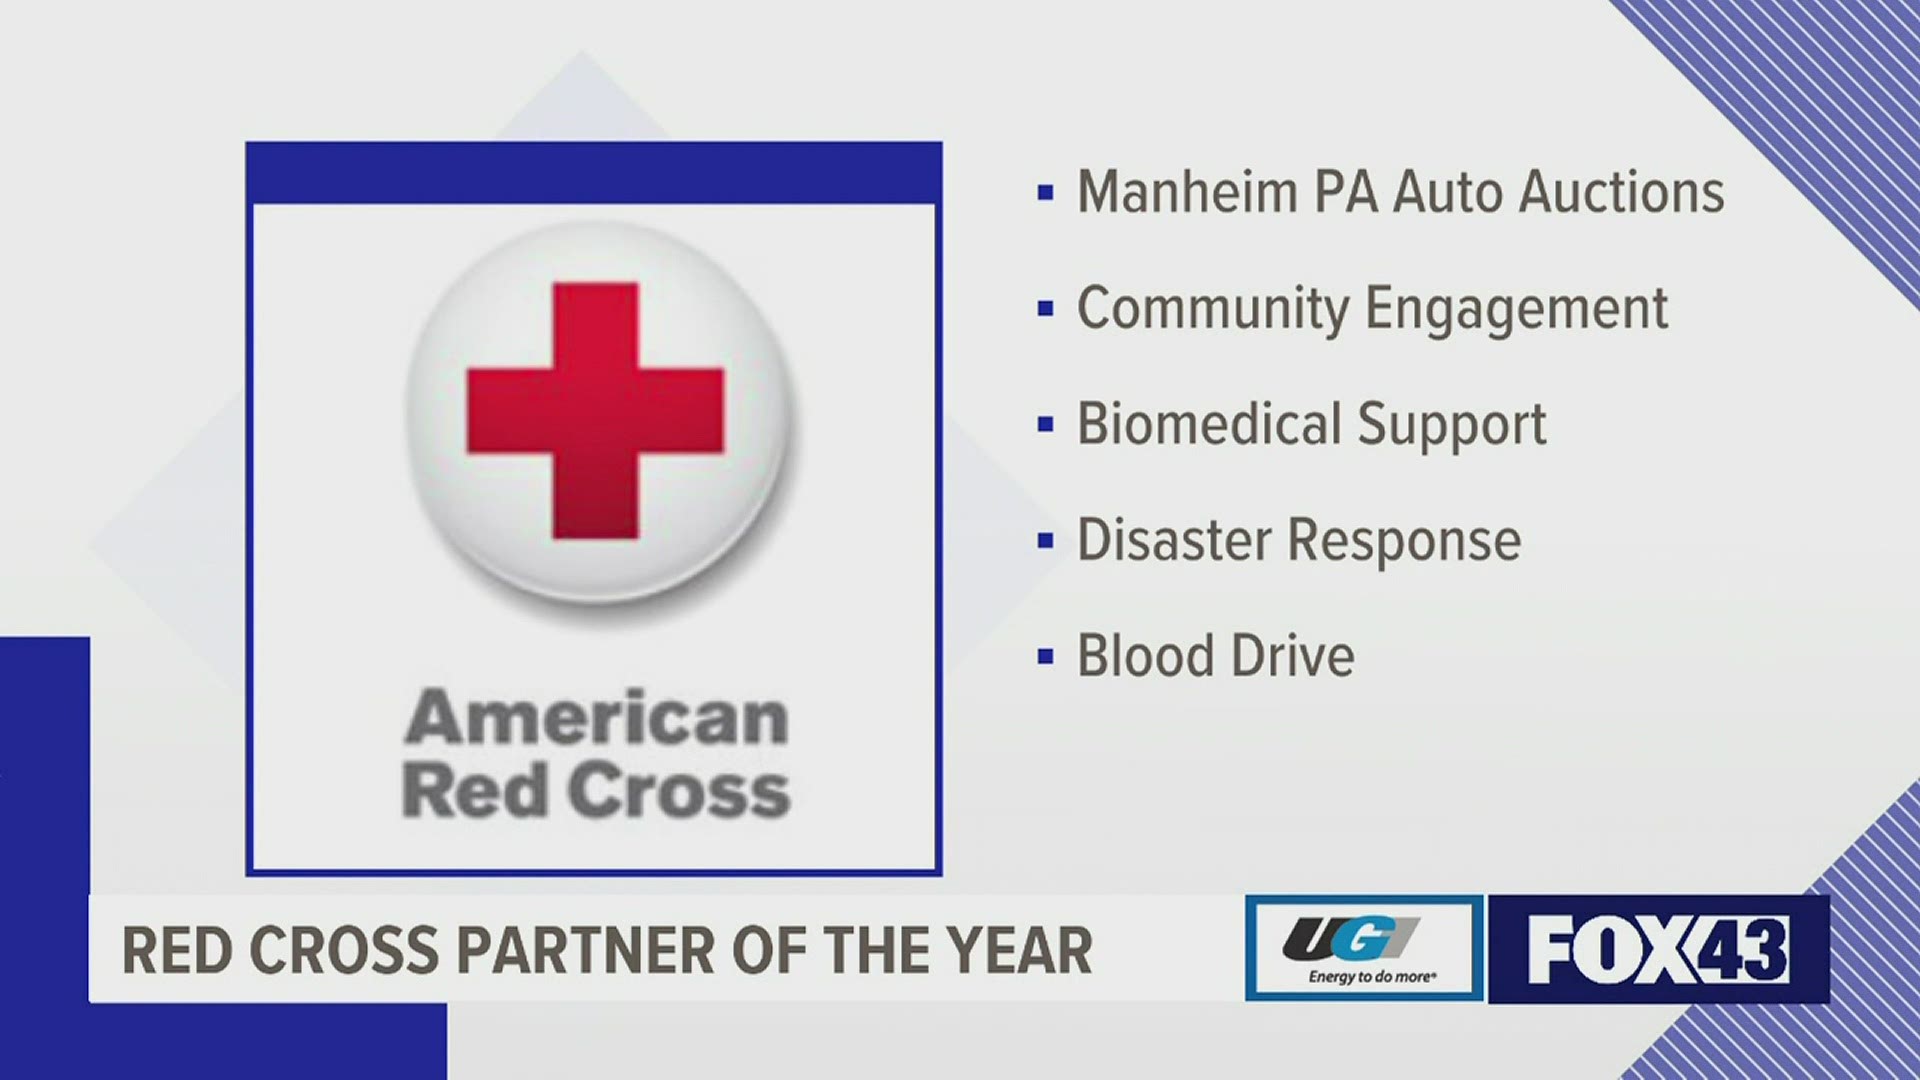 We join the Red Cross in celebrating those in Central PA who have performed extraordinary acts and selflessly helped others this year.